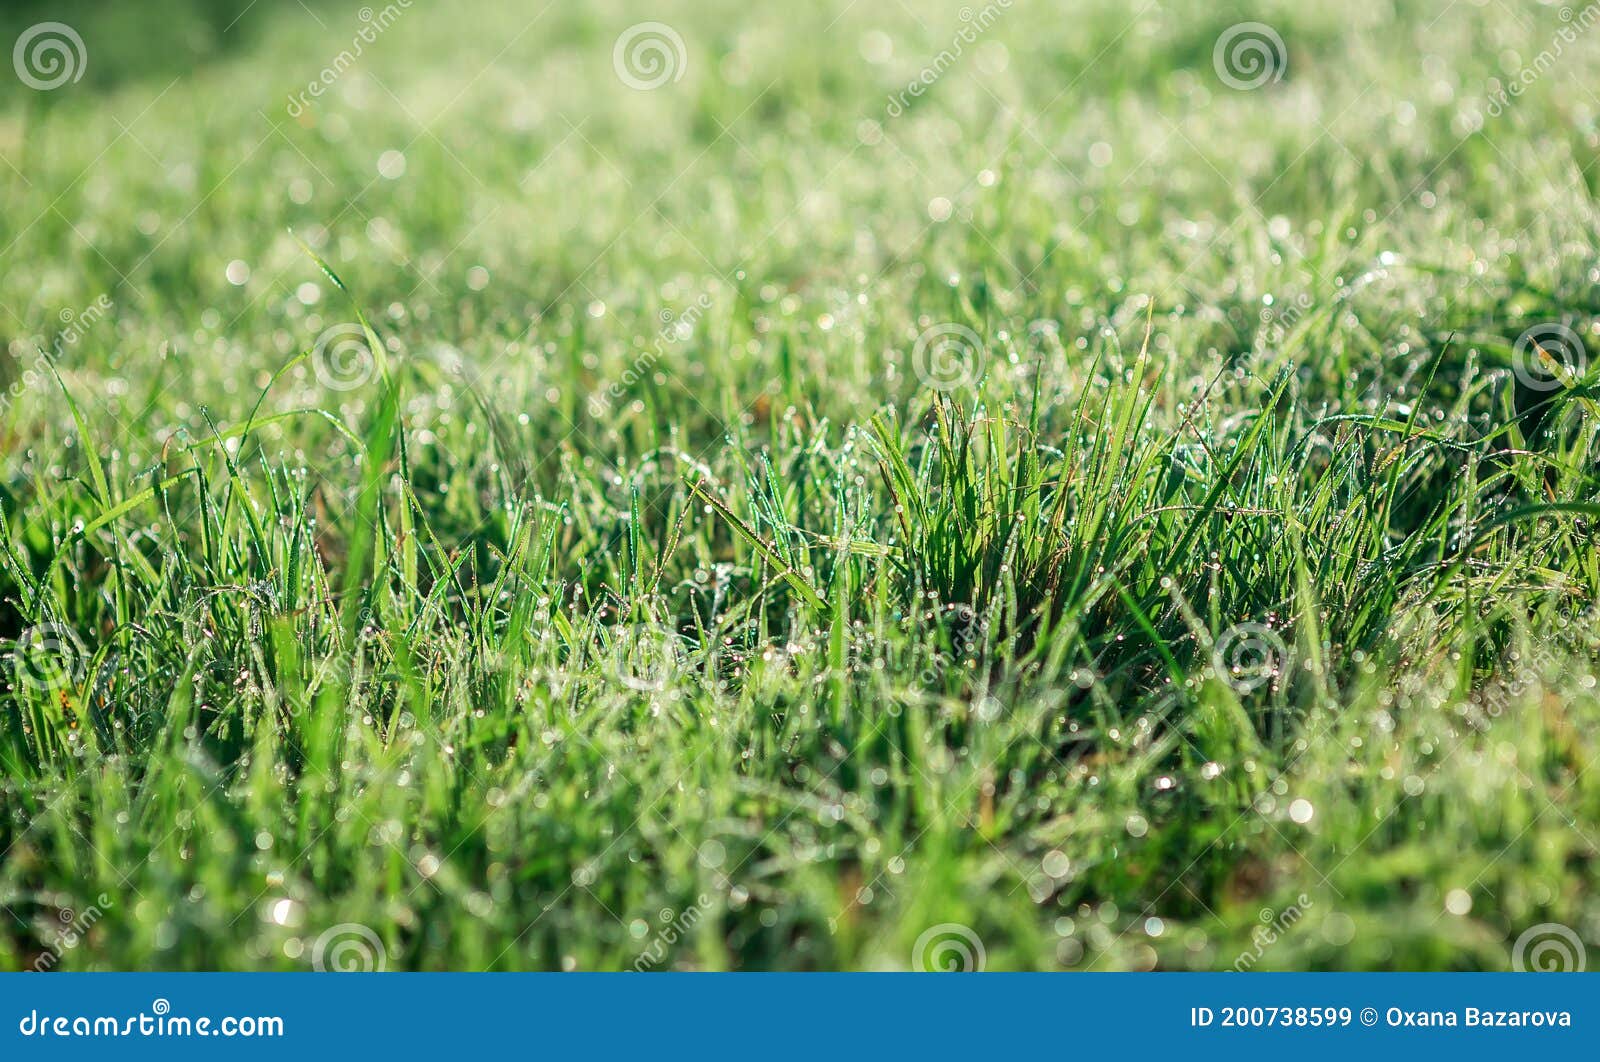 natural background of green  grass with a blury background